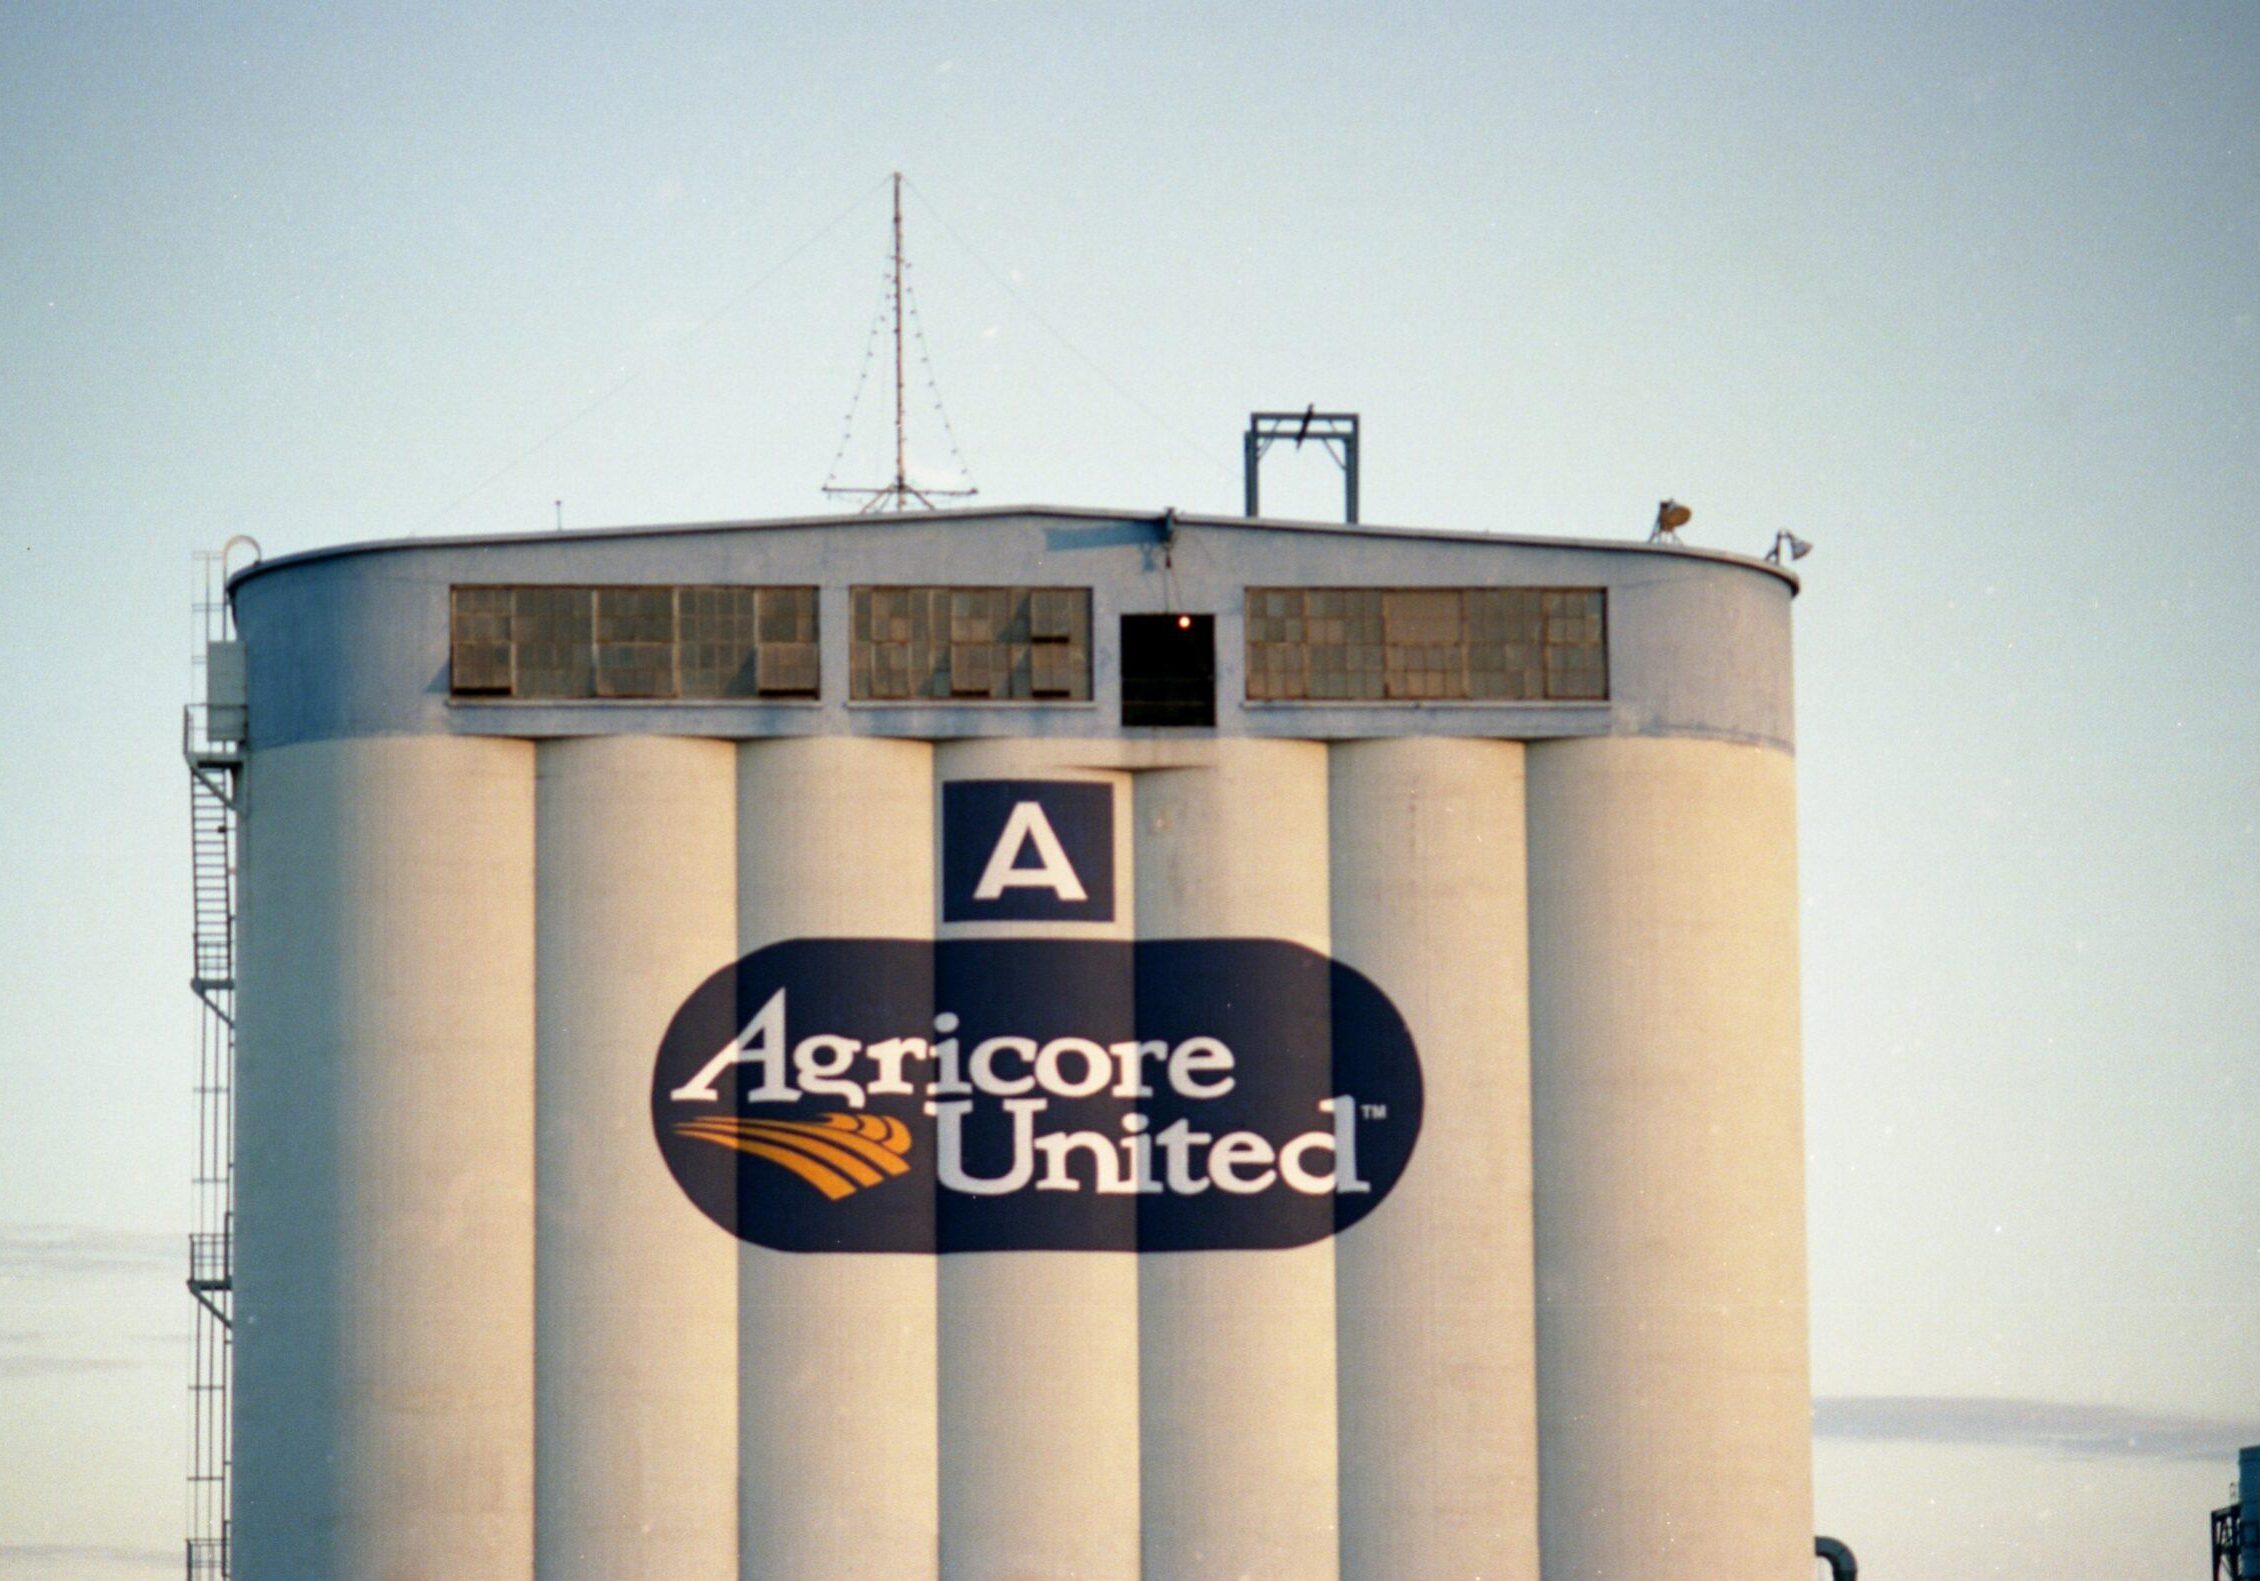 close up of "Agricore United" sign on elevator